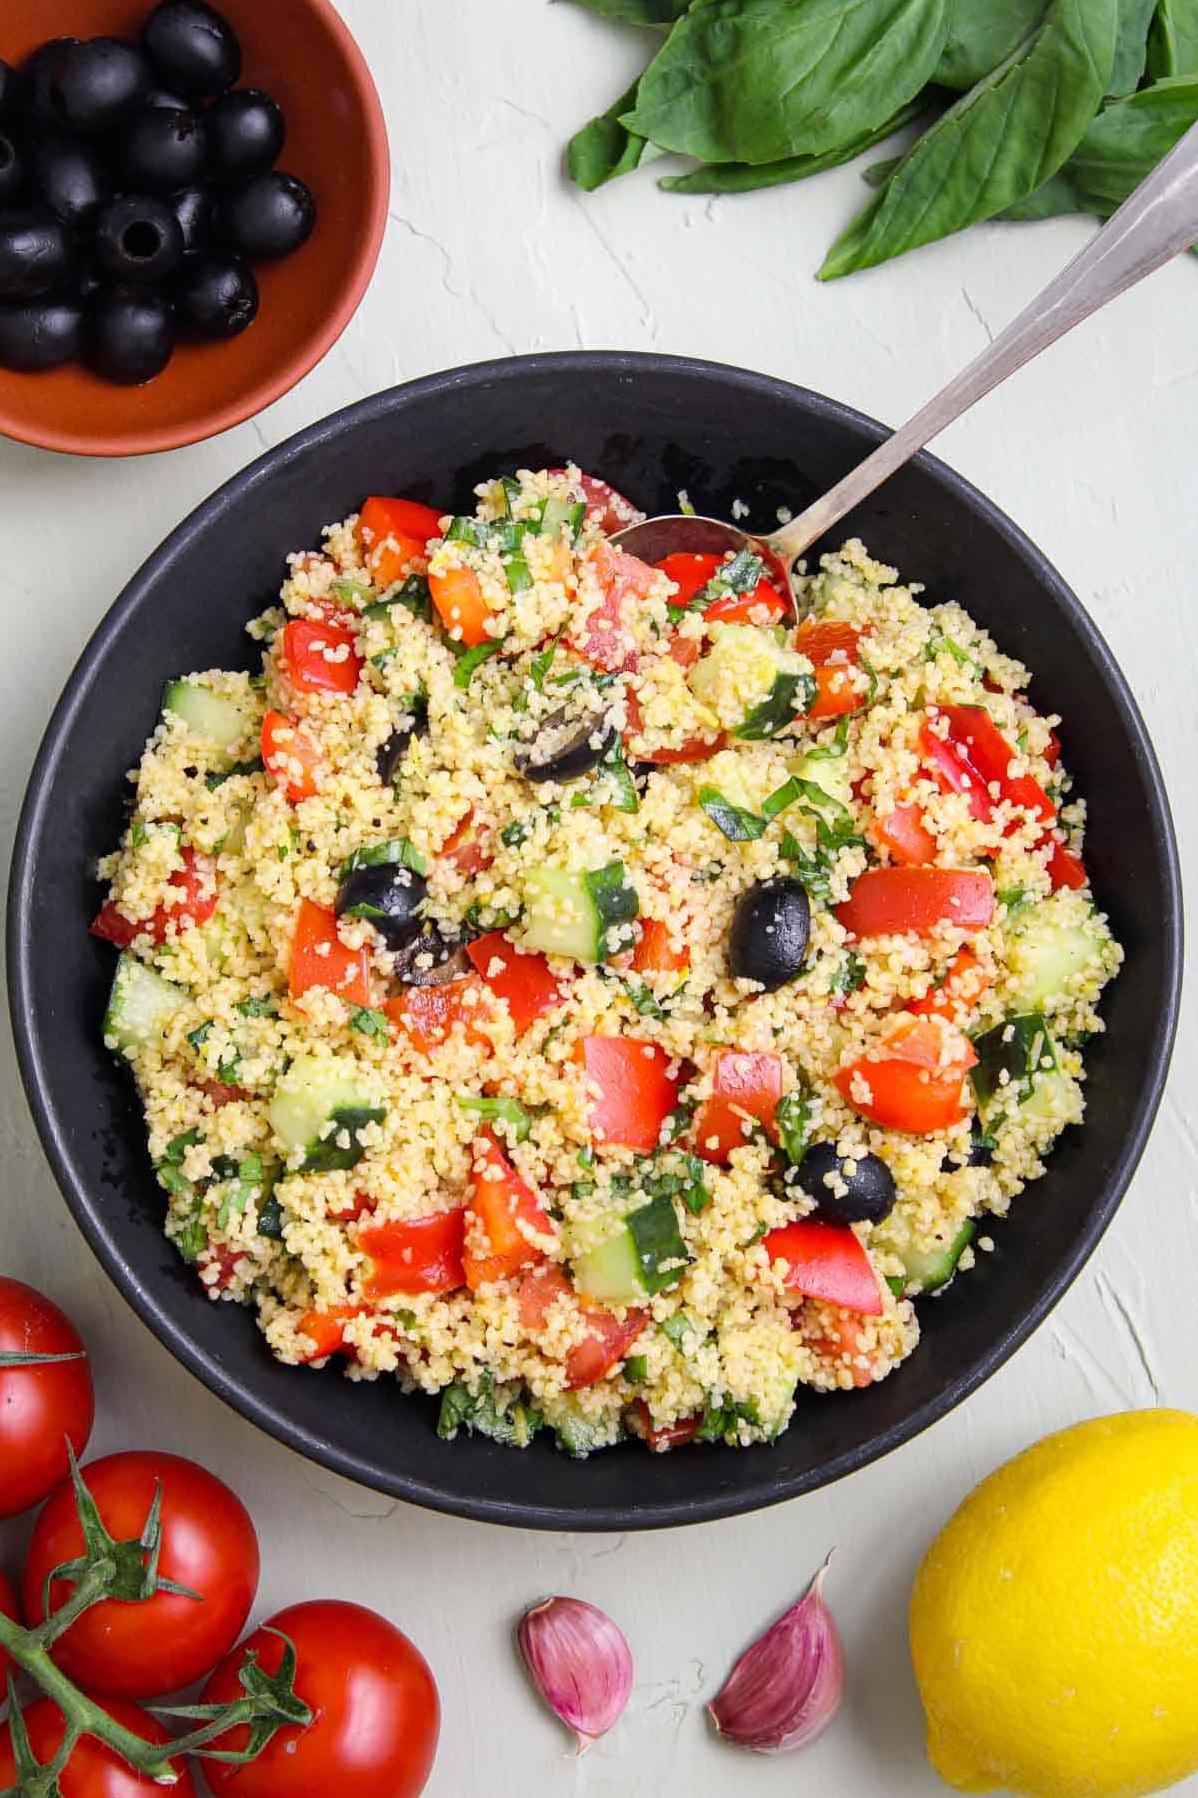  A fresh and colorful couscous salad perfect for a light lunch or dinner